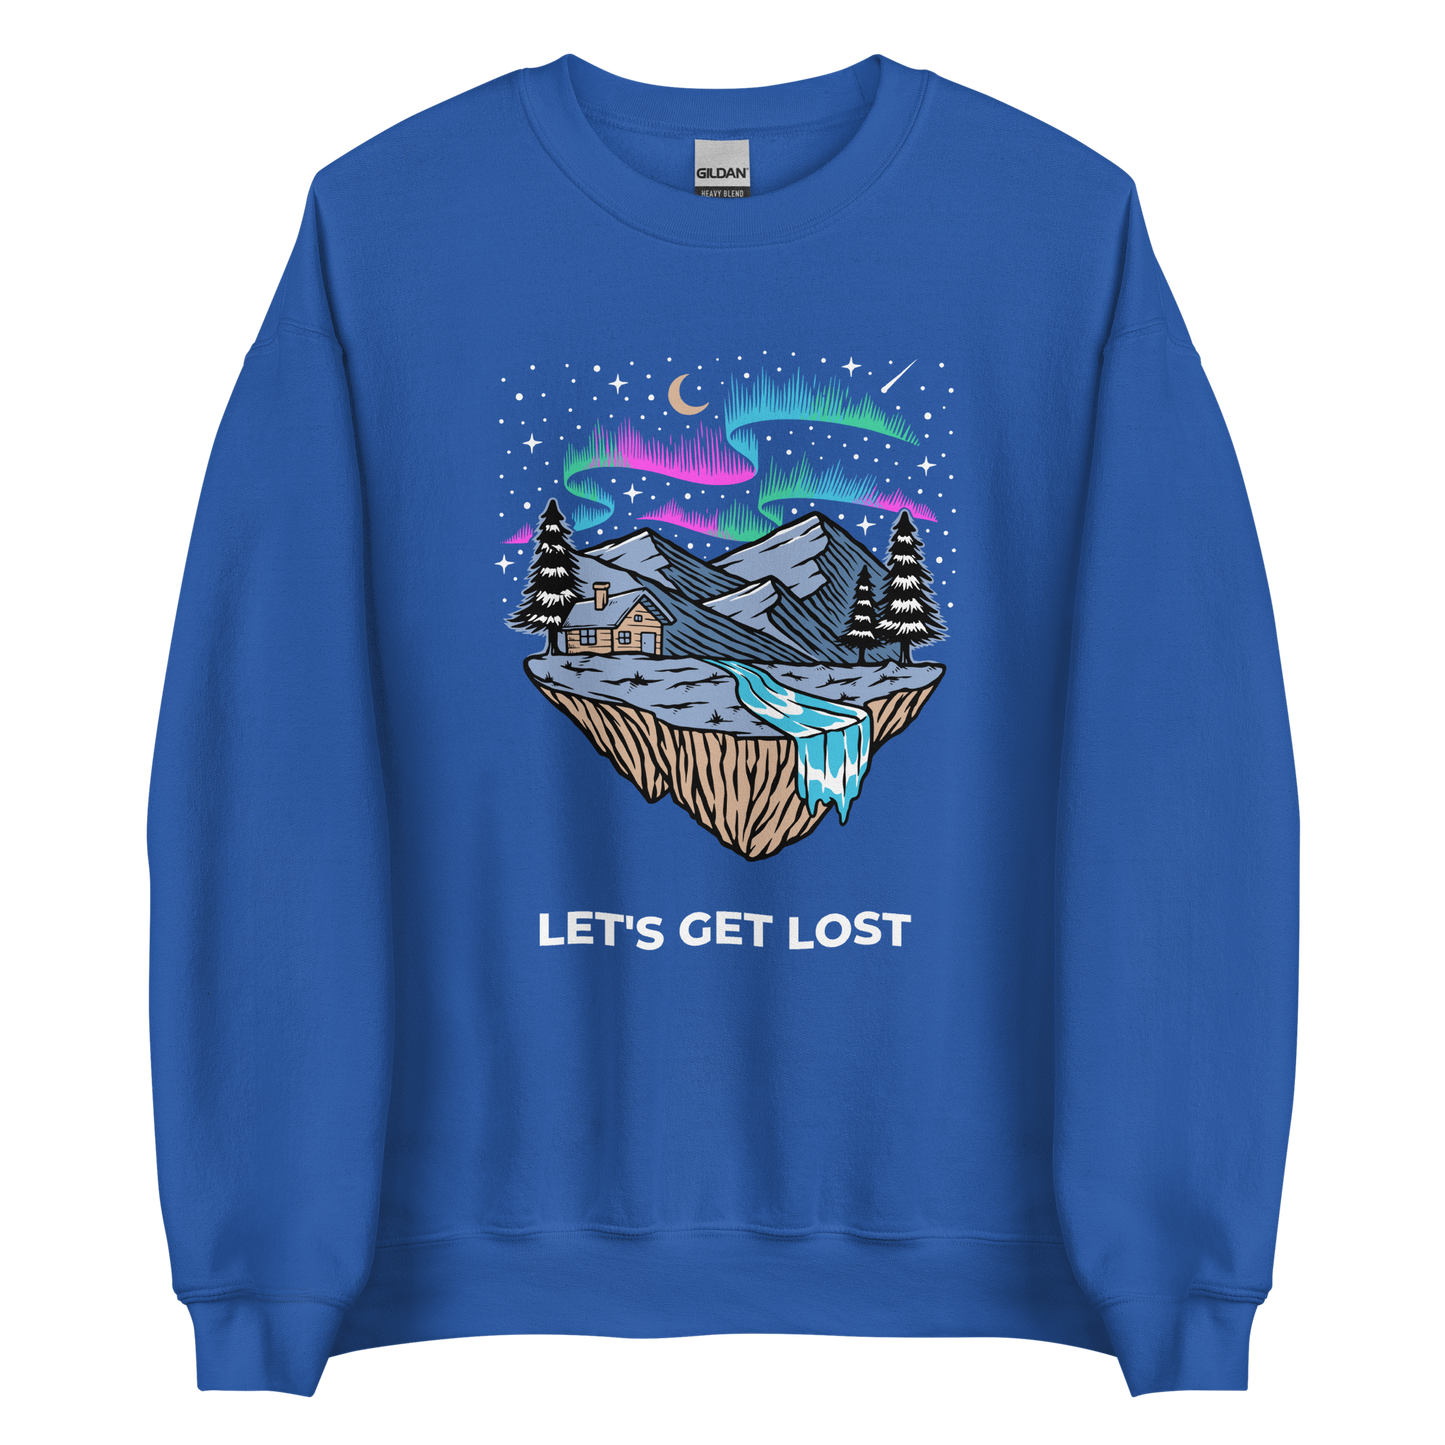 Royal Blue Let's Get Lost Sweatshirt featuring a mesmerizing night sky, adorned with stars and aurora borealis graphic on the chest - Cool Graphic Northern Lights Sweatshirts - Boozy Fox